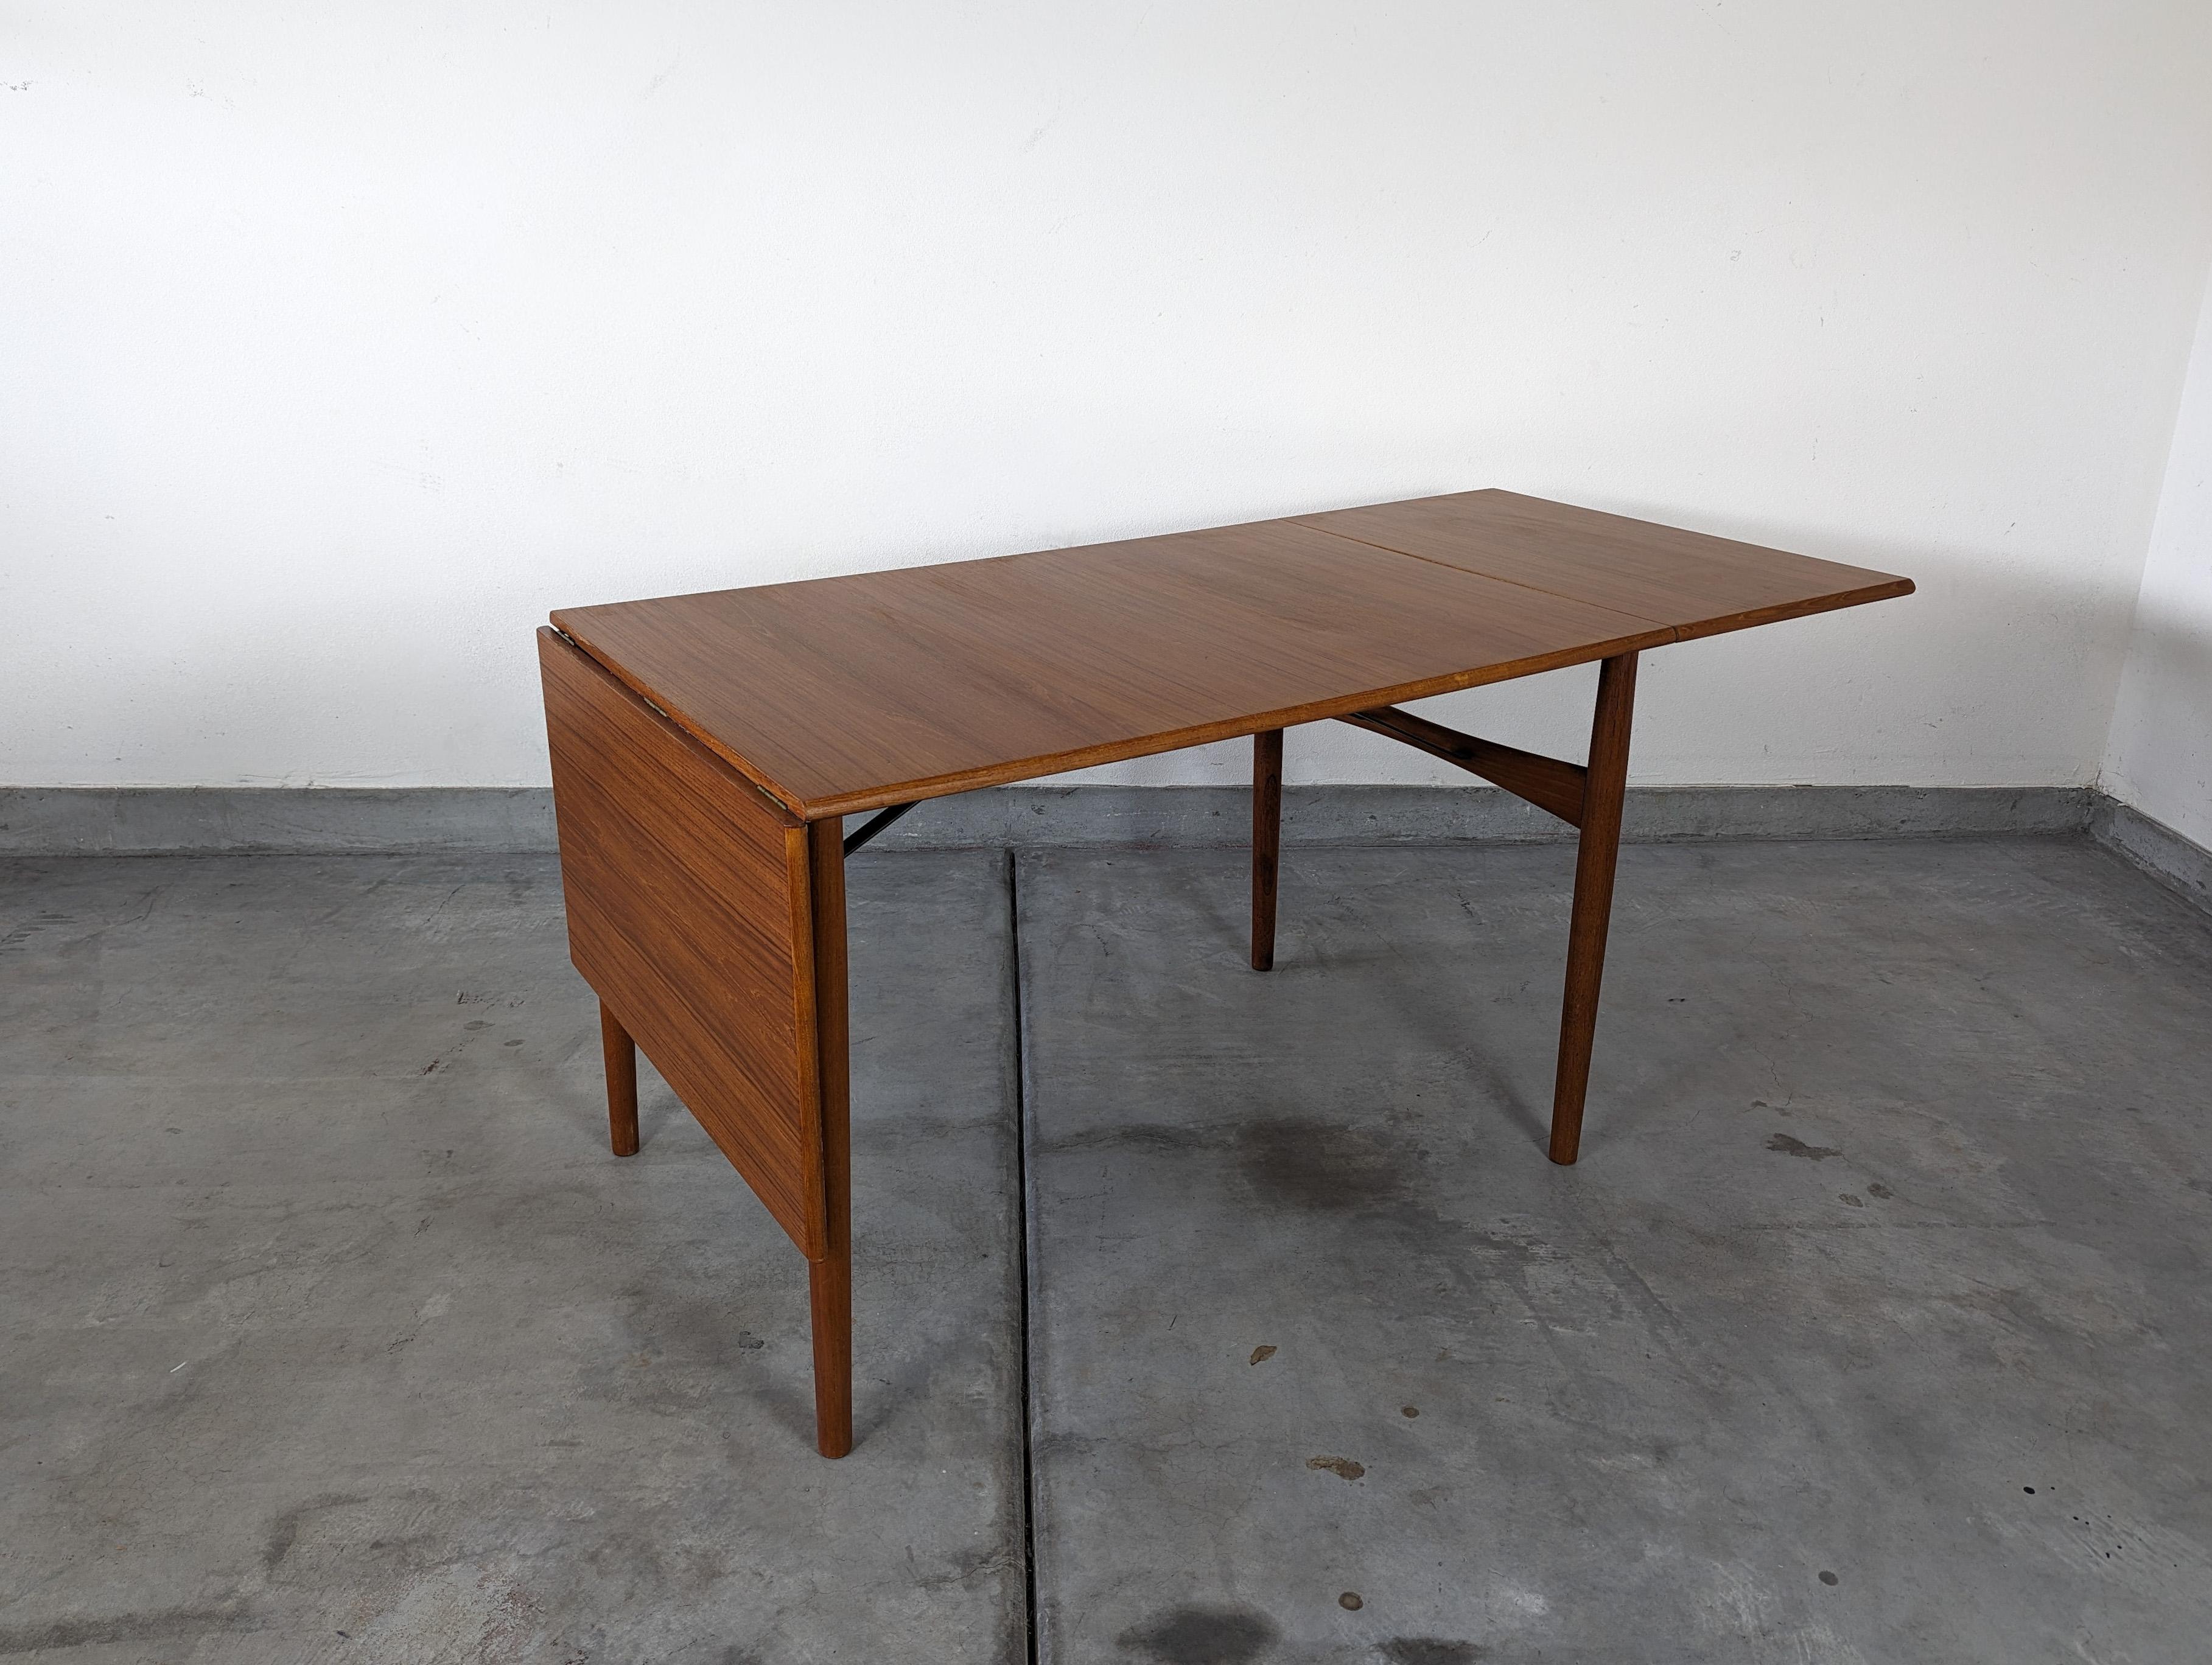 We are proud to present this stunning Scandinavian Teak Dining Table, styled after the timeless designs of Borge Mogensen, one of the most influential designers of the mid-century modern period. Crafted in the 1950s, this table embodies the